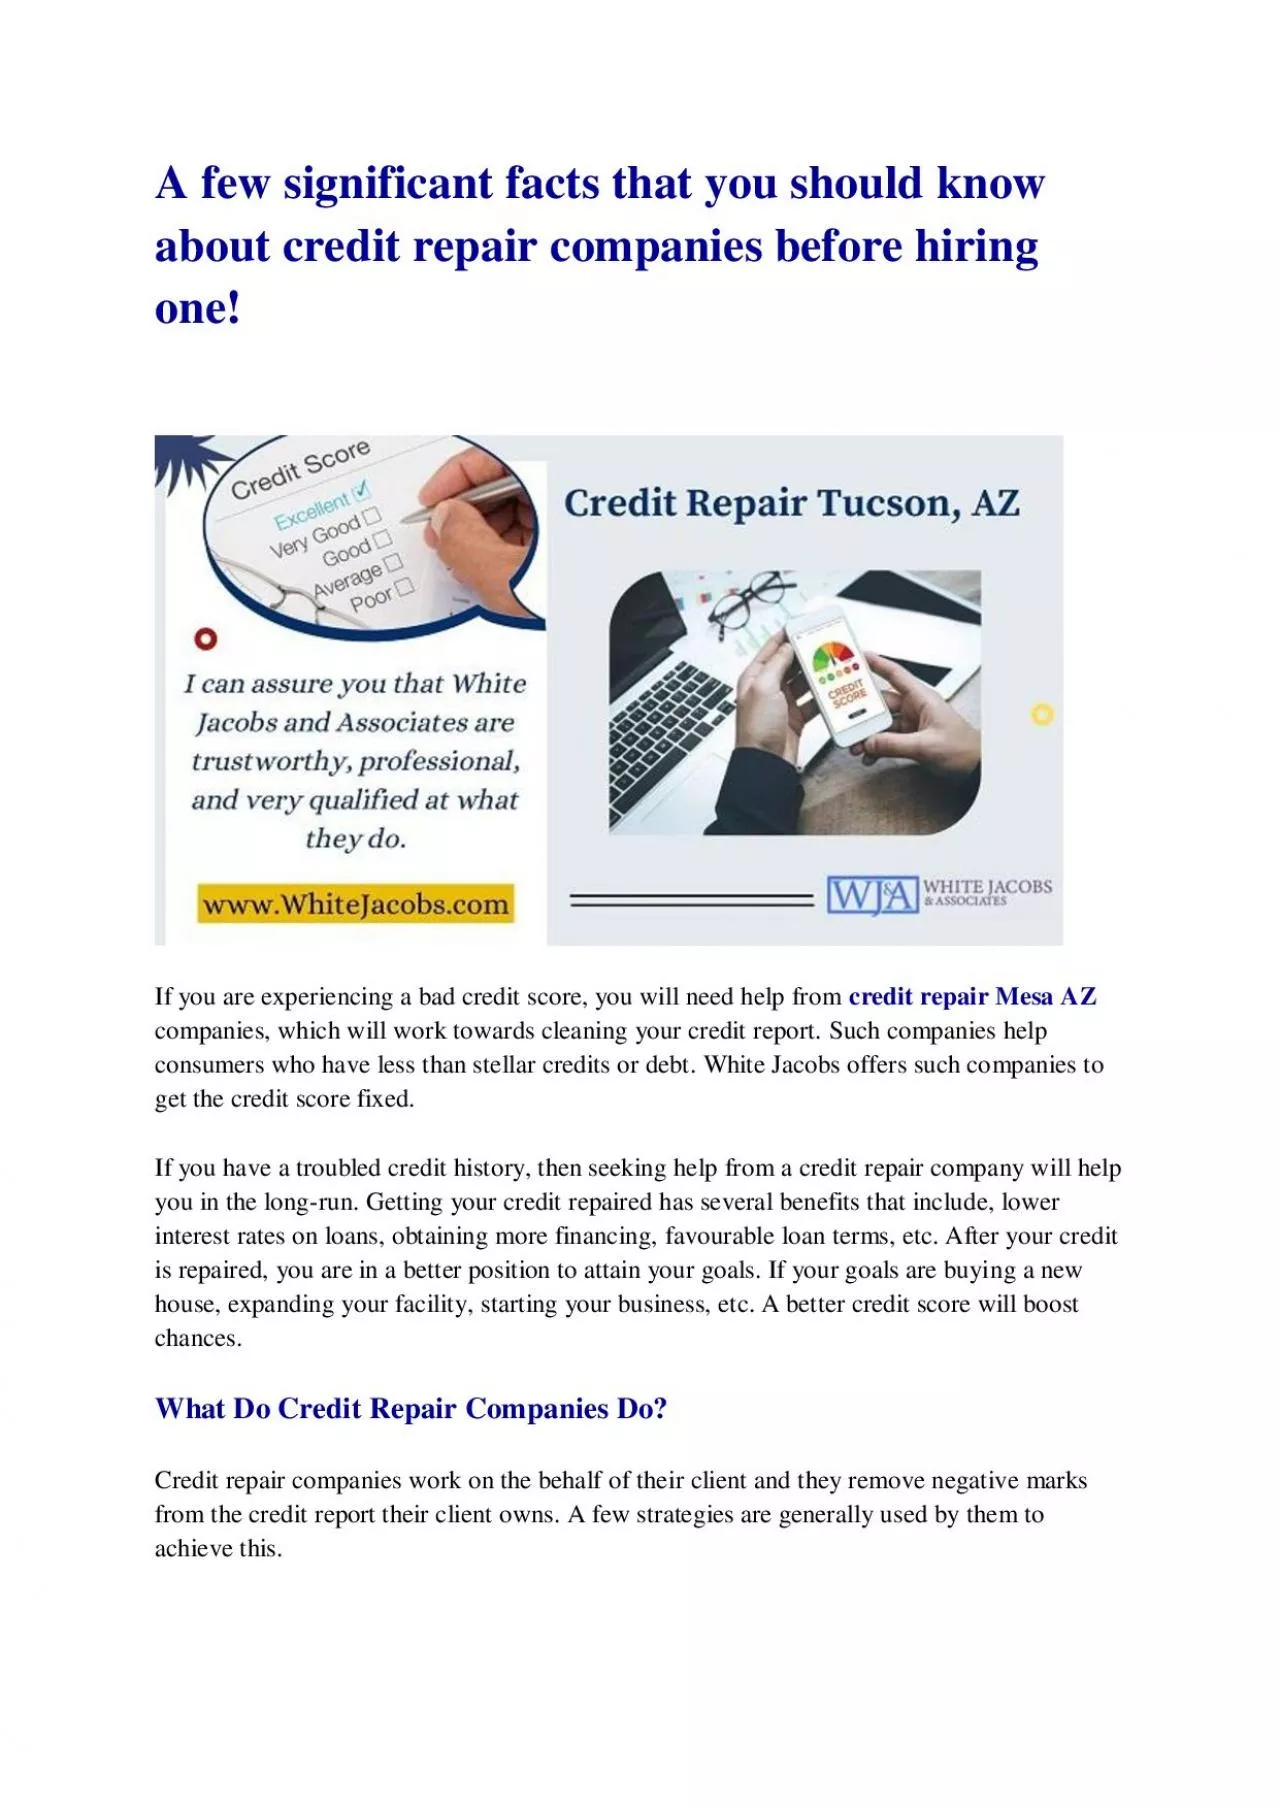 A few significant facts that you should know about credit repair companies before hiring